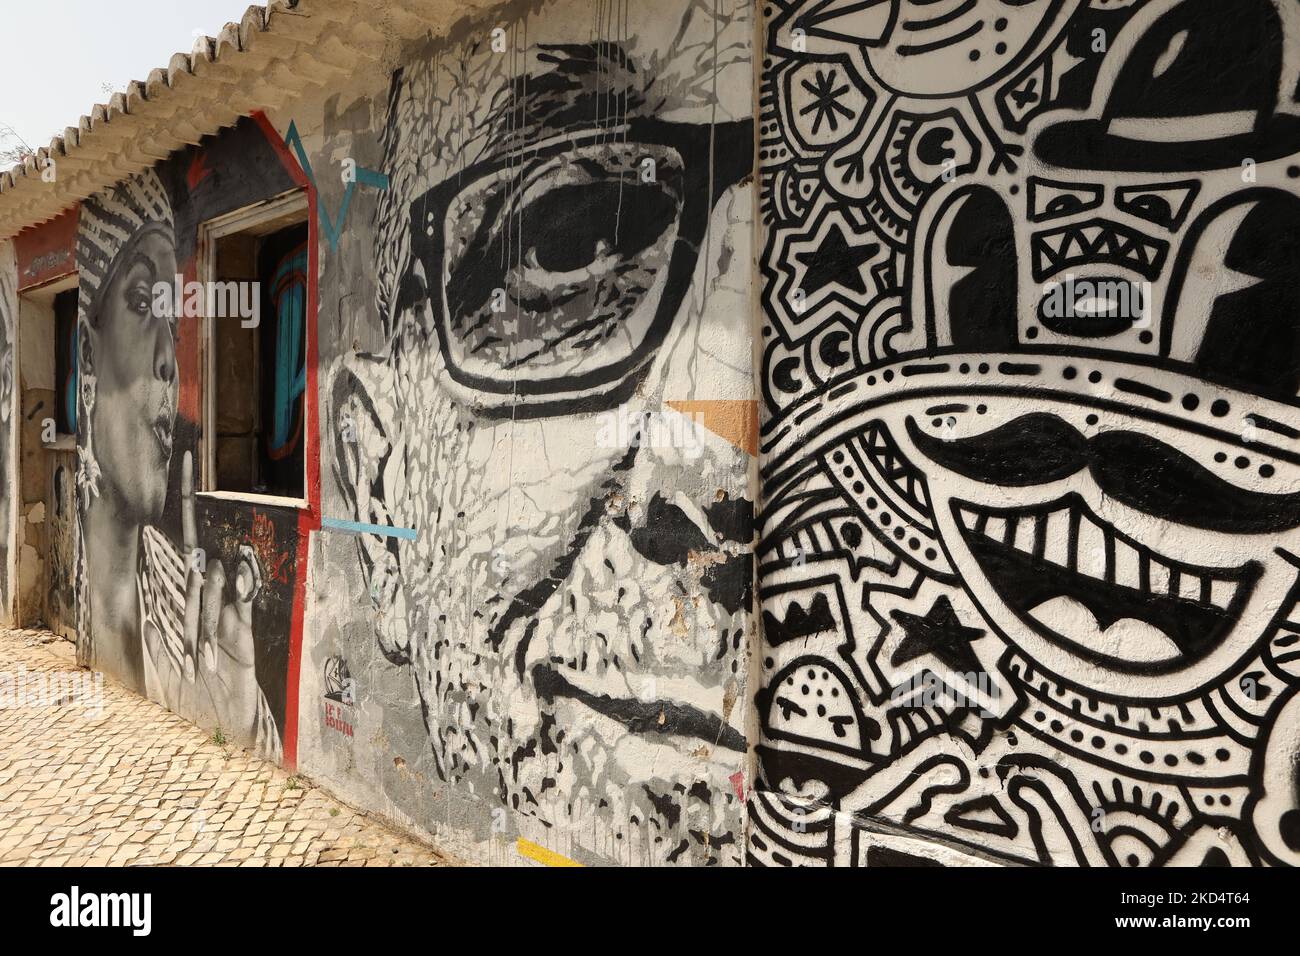 Street Art. A mural of a man wearing spectacles and a pop art mural. Lagos, Algarve, Portugal Stock Photo